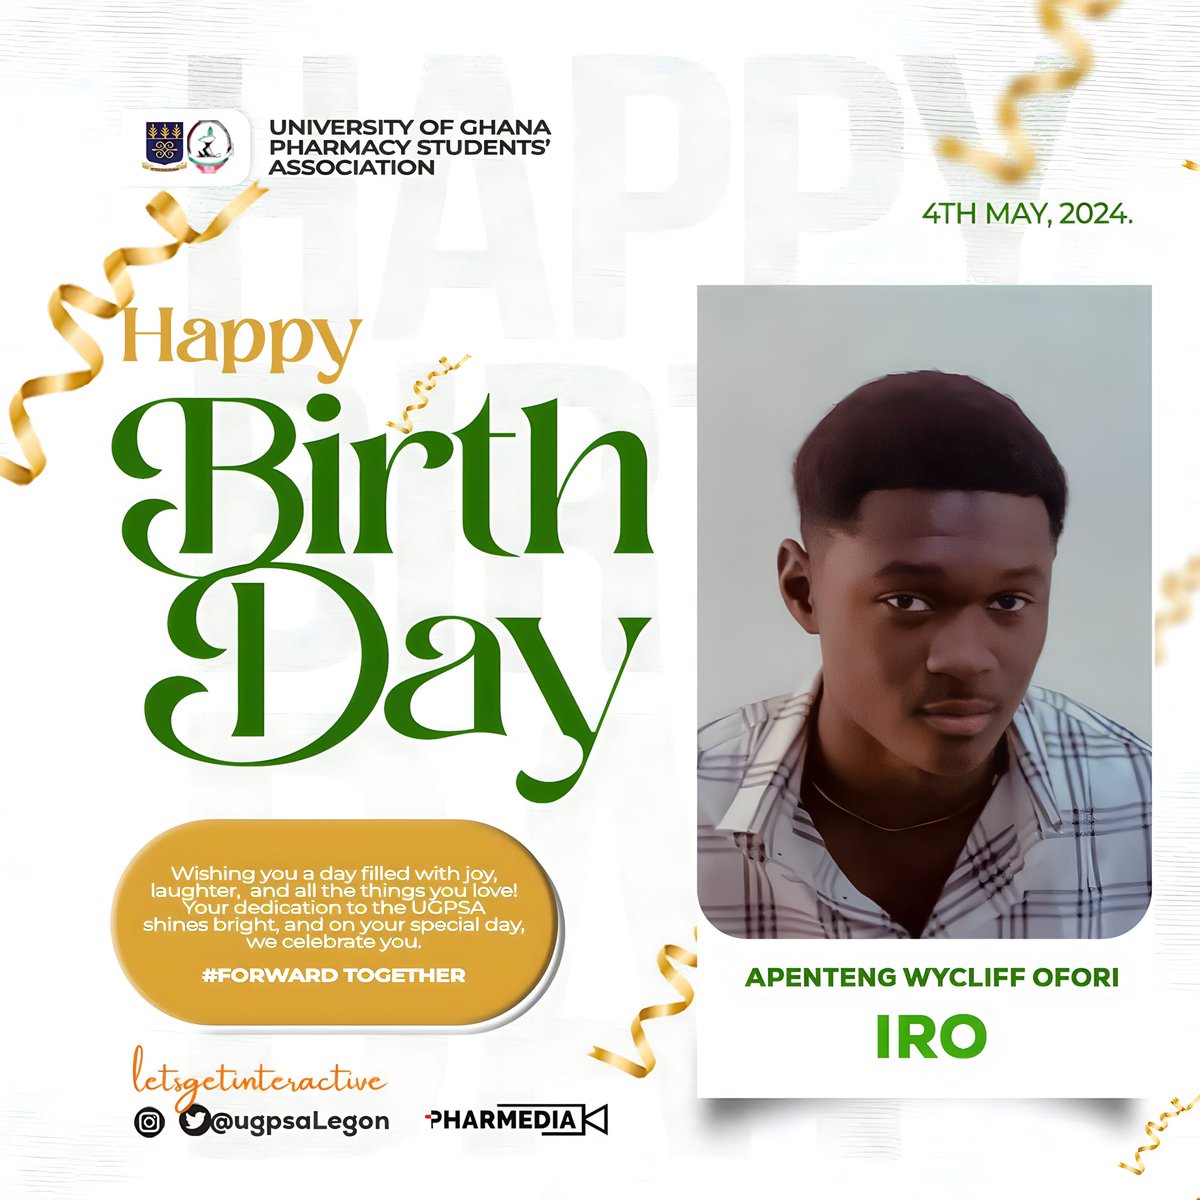 Happy Birthday to our IRO ✨
May your birthday be filled with joy, and your year filled with success. 🎉🎉
UGPSA appreciates you!
Happy Birthday, Wycliff Ofori Apenteng 🎉🎈.
#FORWARDTOGETHER

*POWERED BY PHARMEDIA*📸